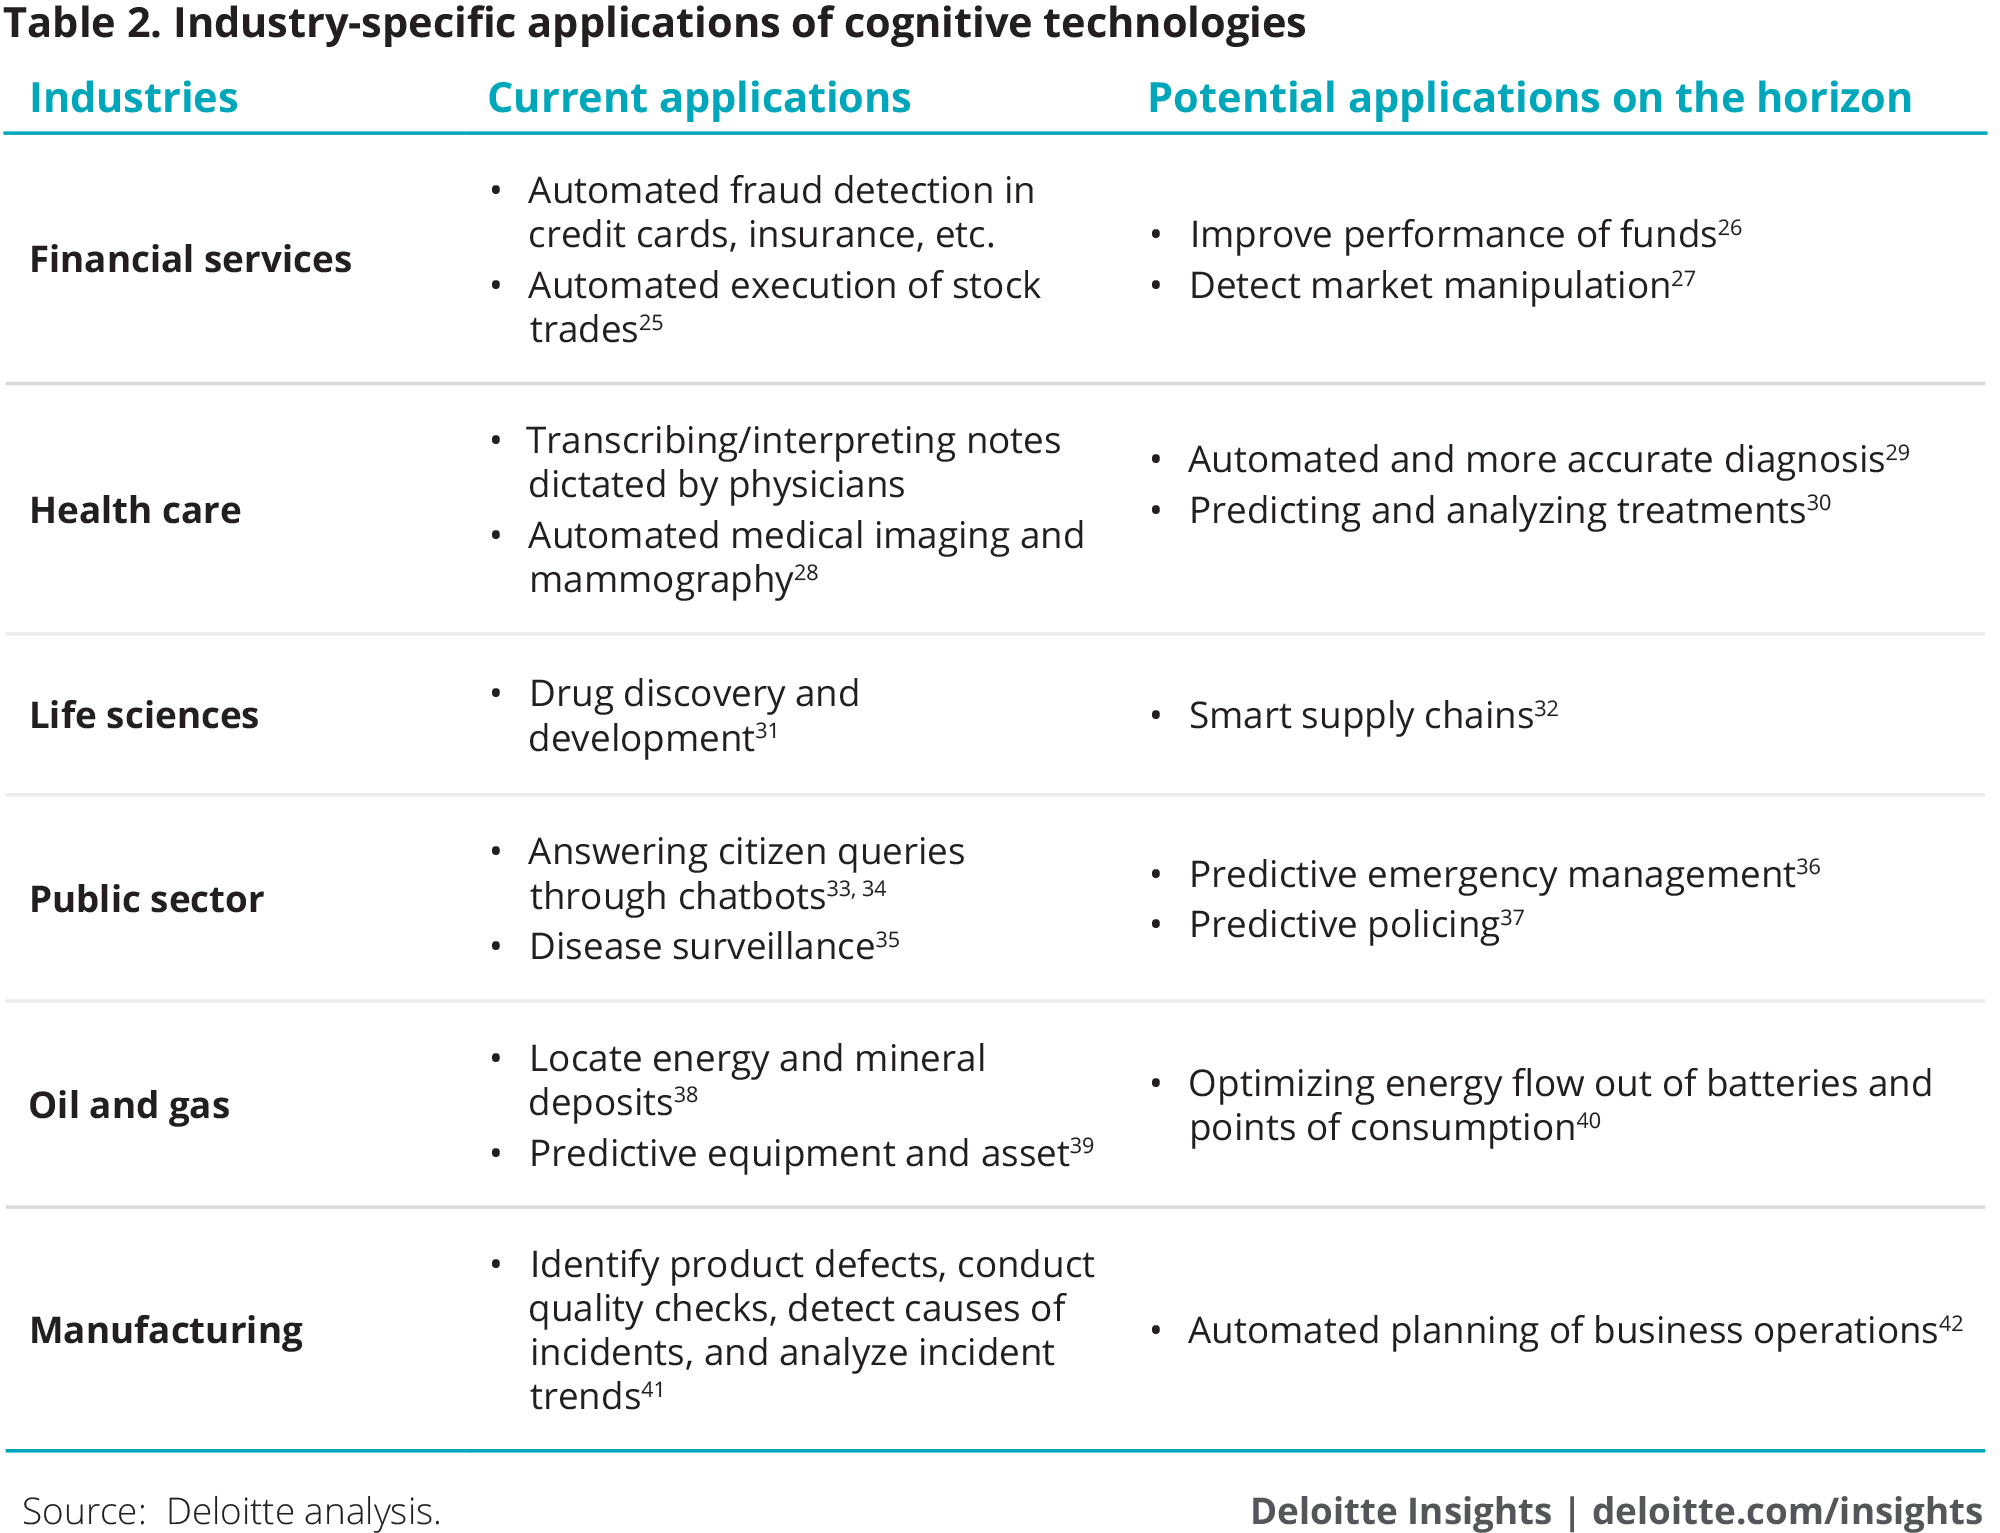 Industry-specific applications of cognitive technologies